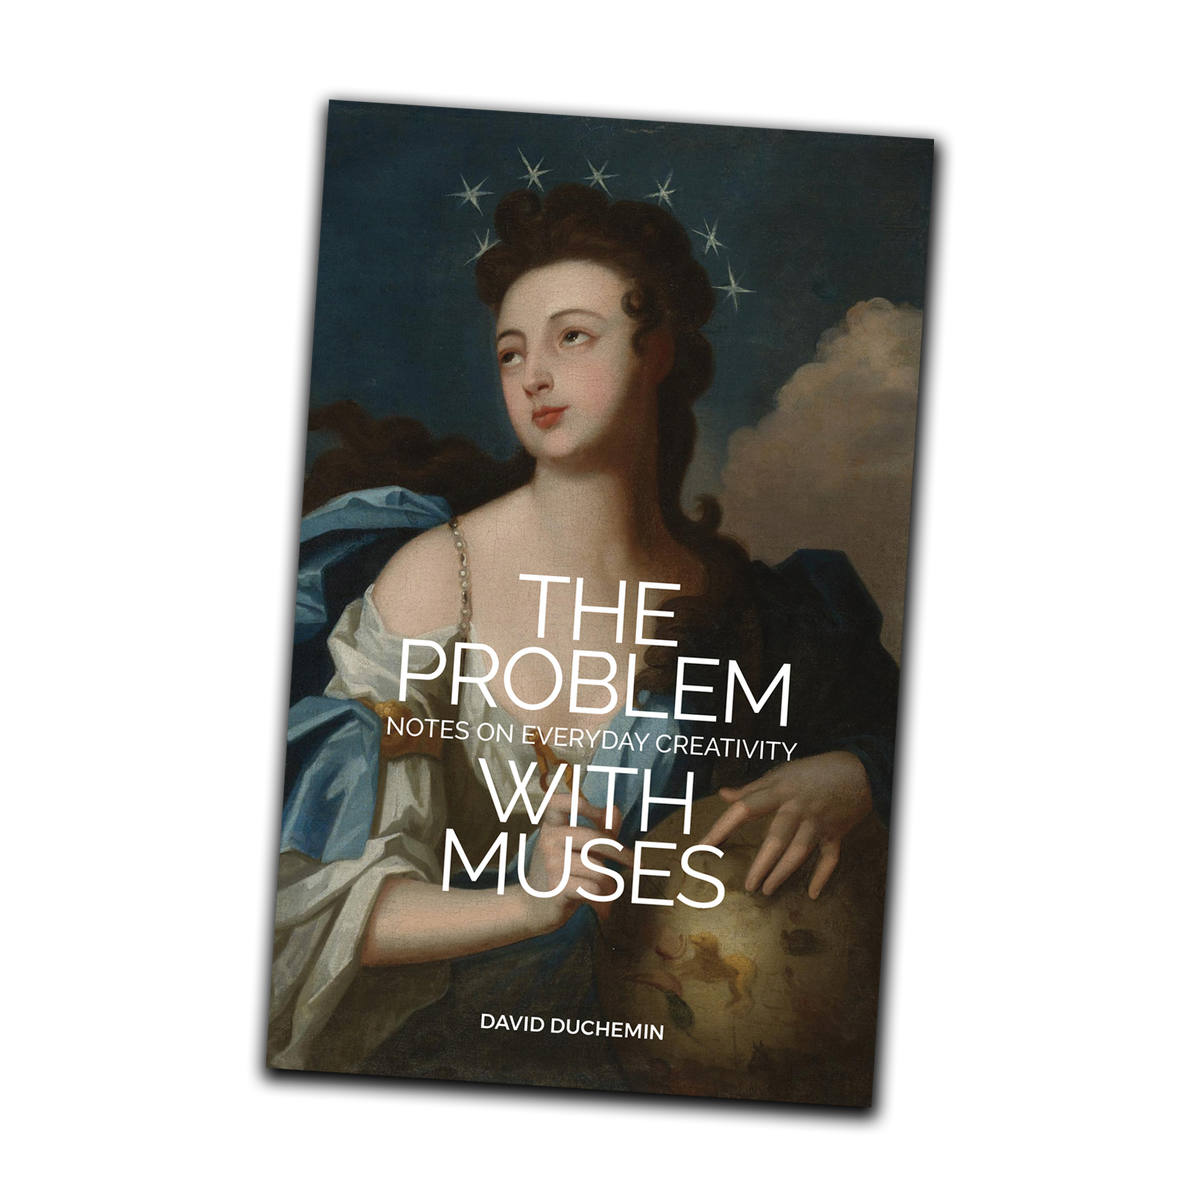 The Problem with Muses